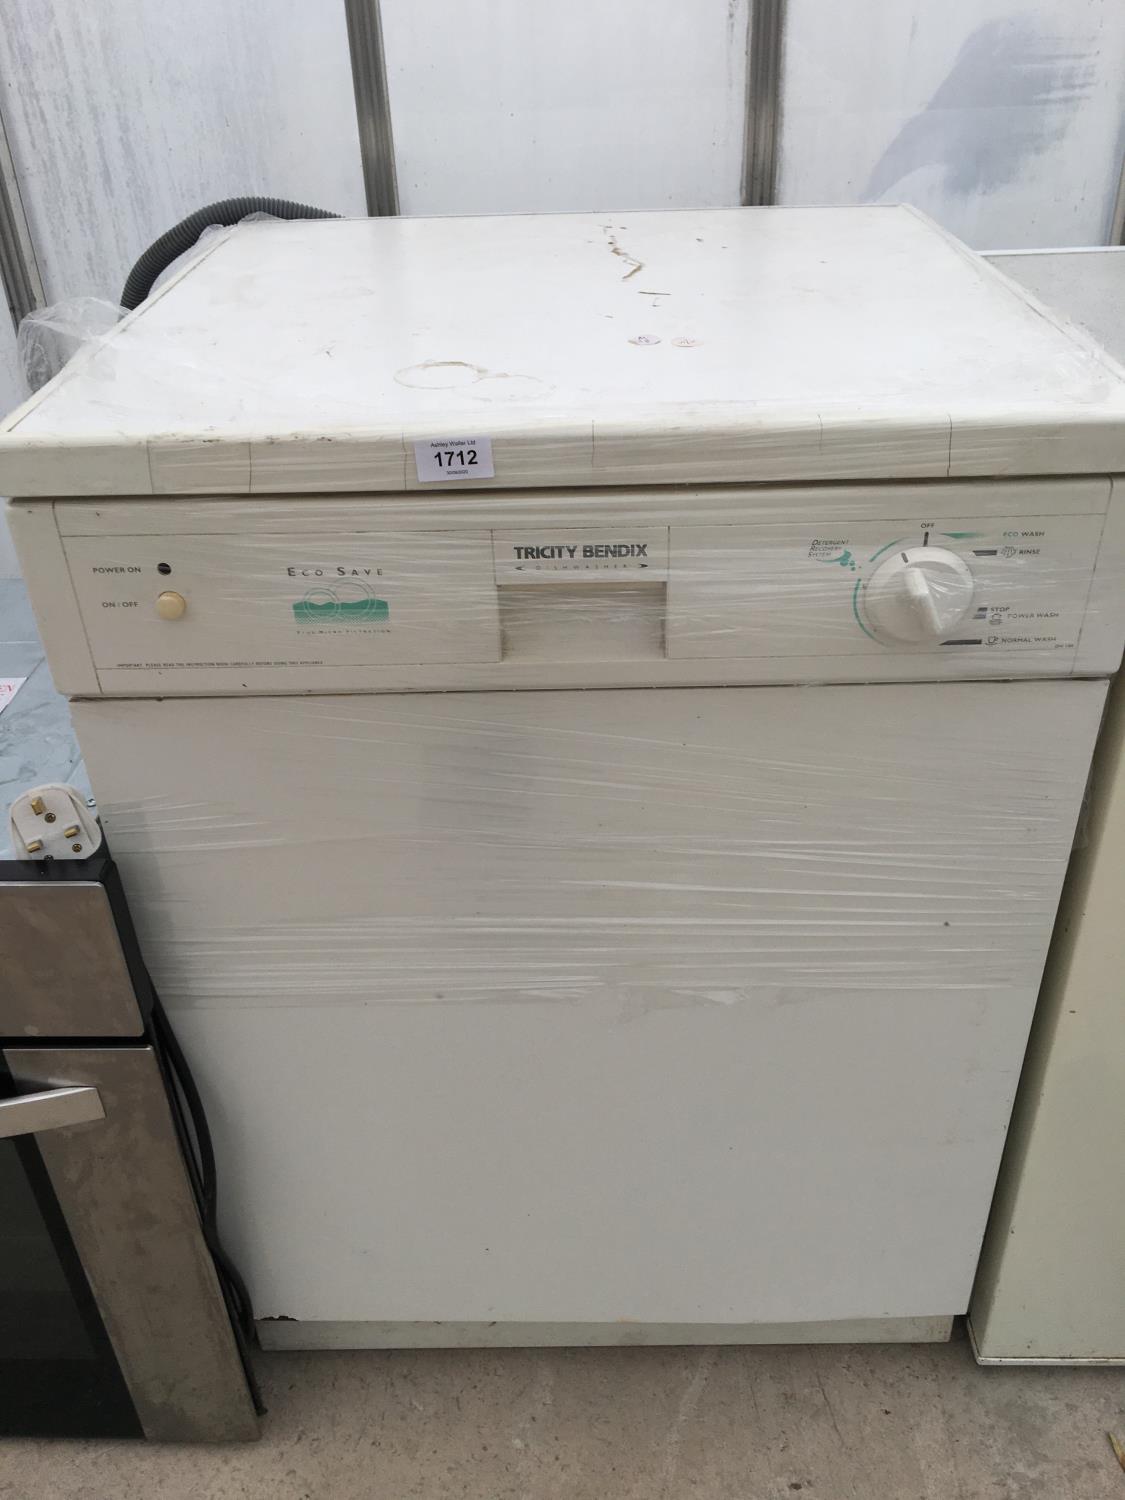 A TRICITY BENDIX DISHWASHER BELIEVED WORKING BUT NO WARRANTY